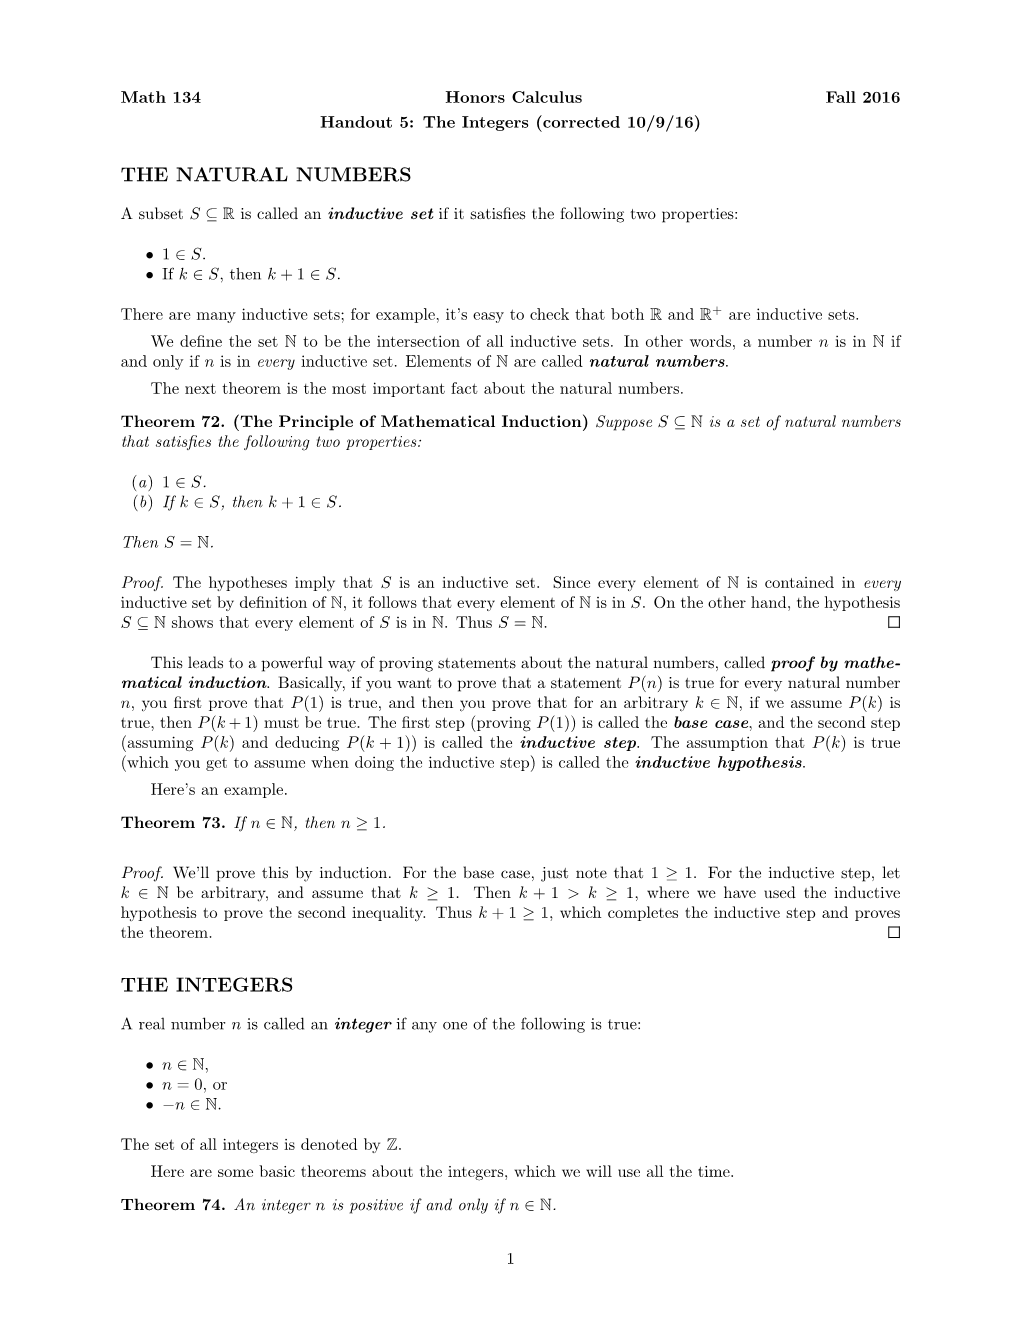 The Natural Numbers the Integers